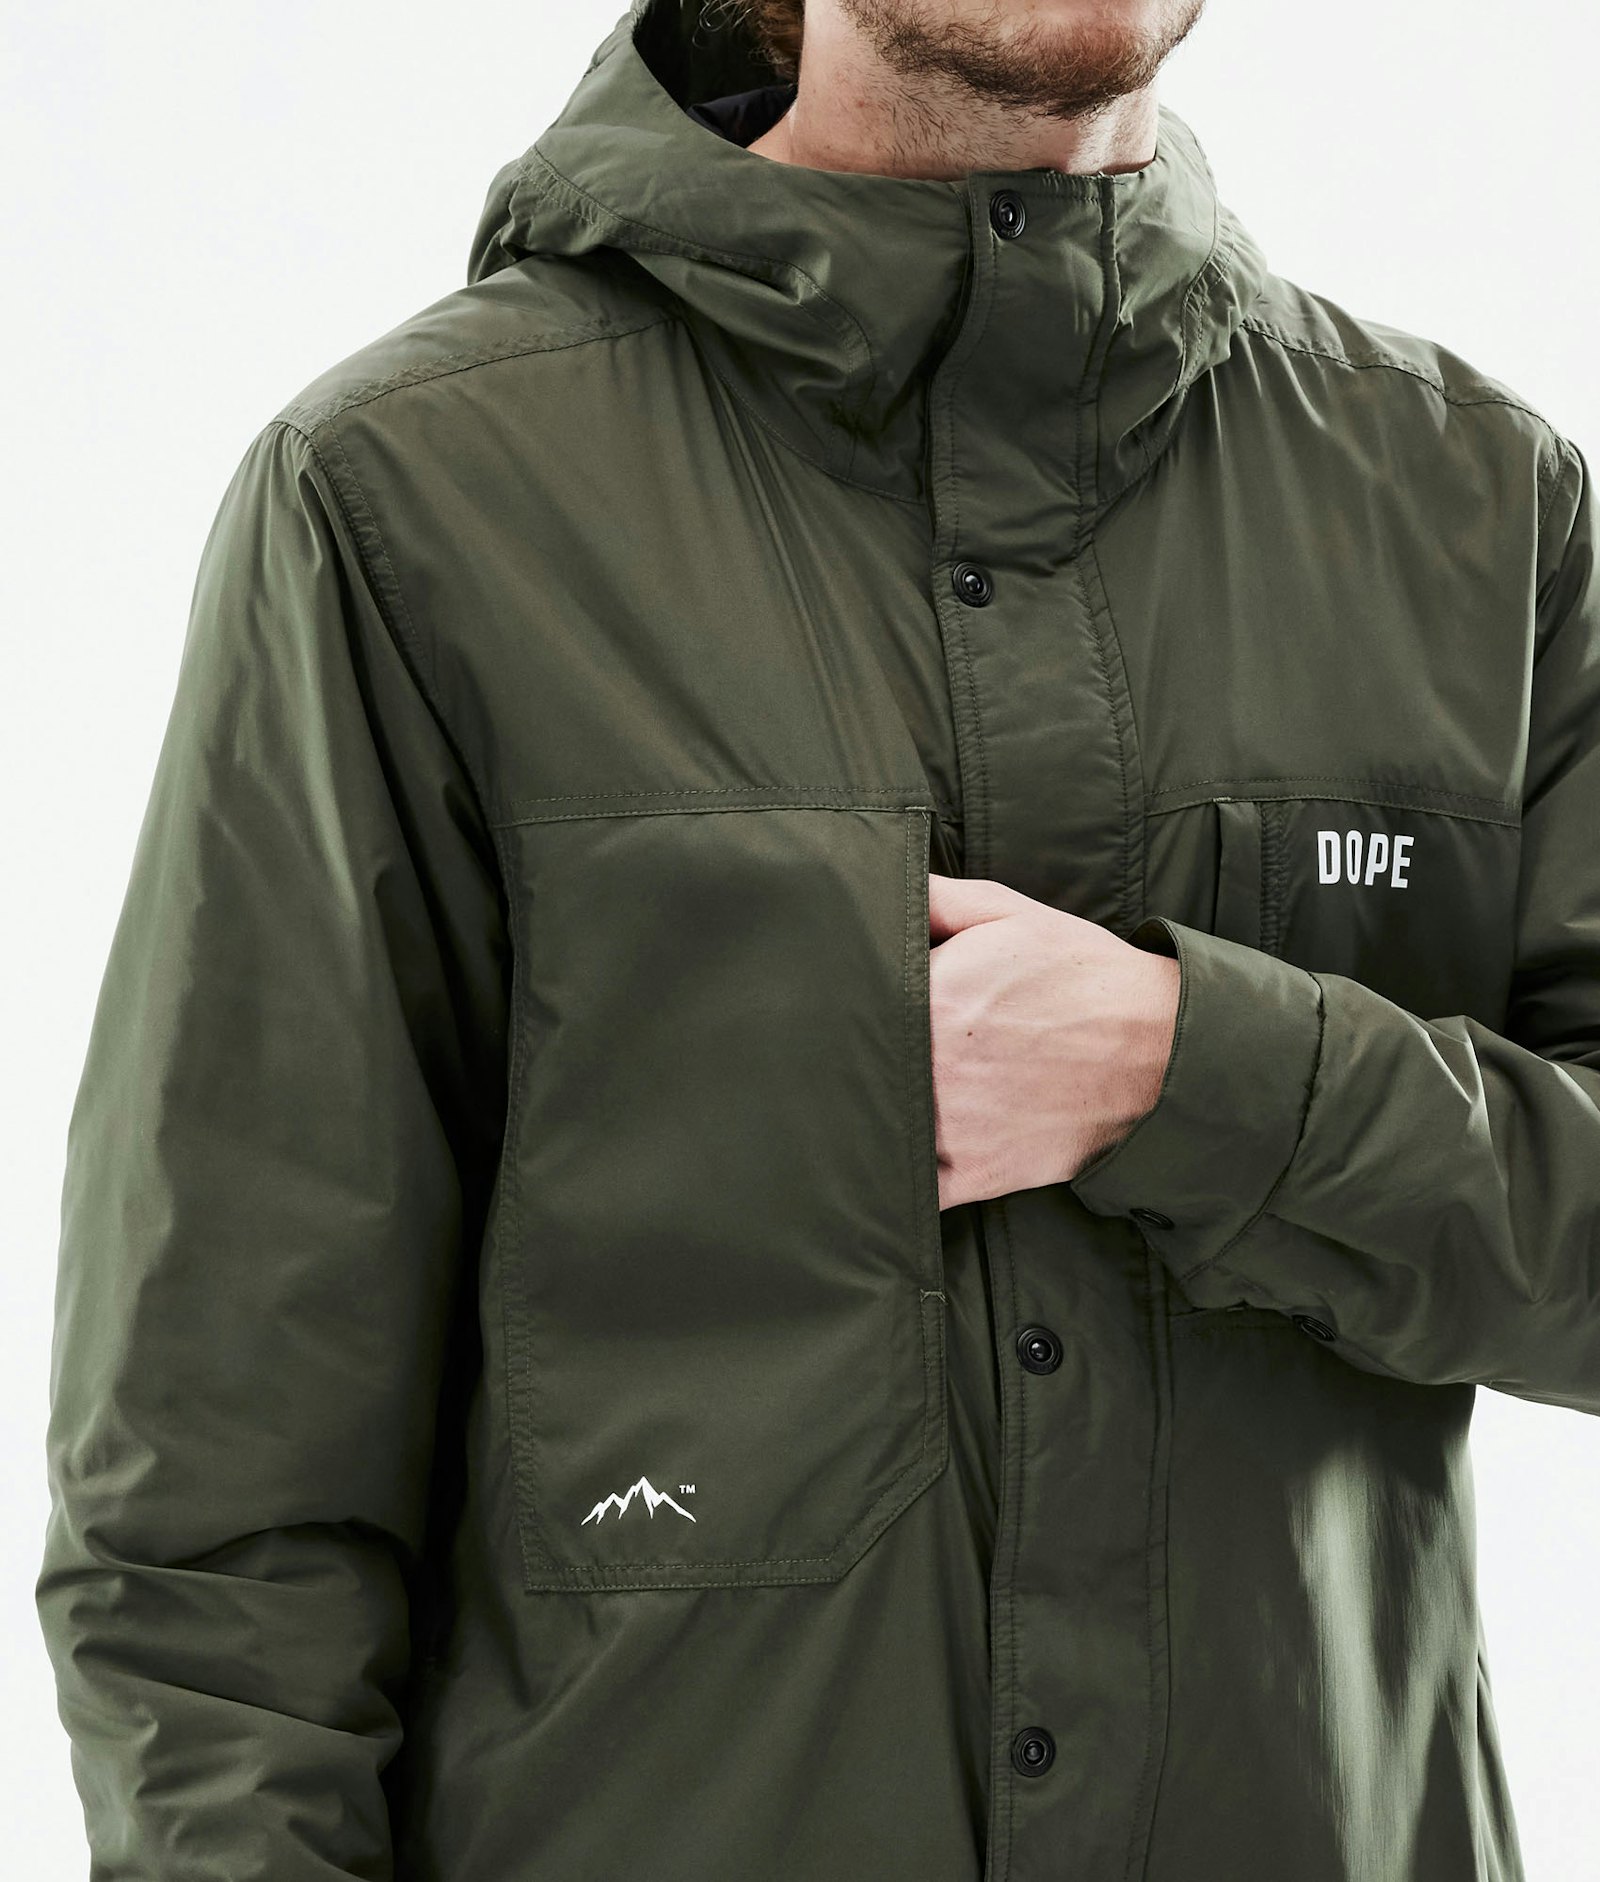 Insulated Veste - Couche intermédiaire Homme Olive Green Renewed, Image 11 sur 12